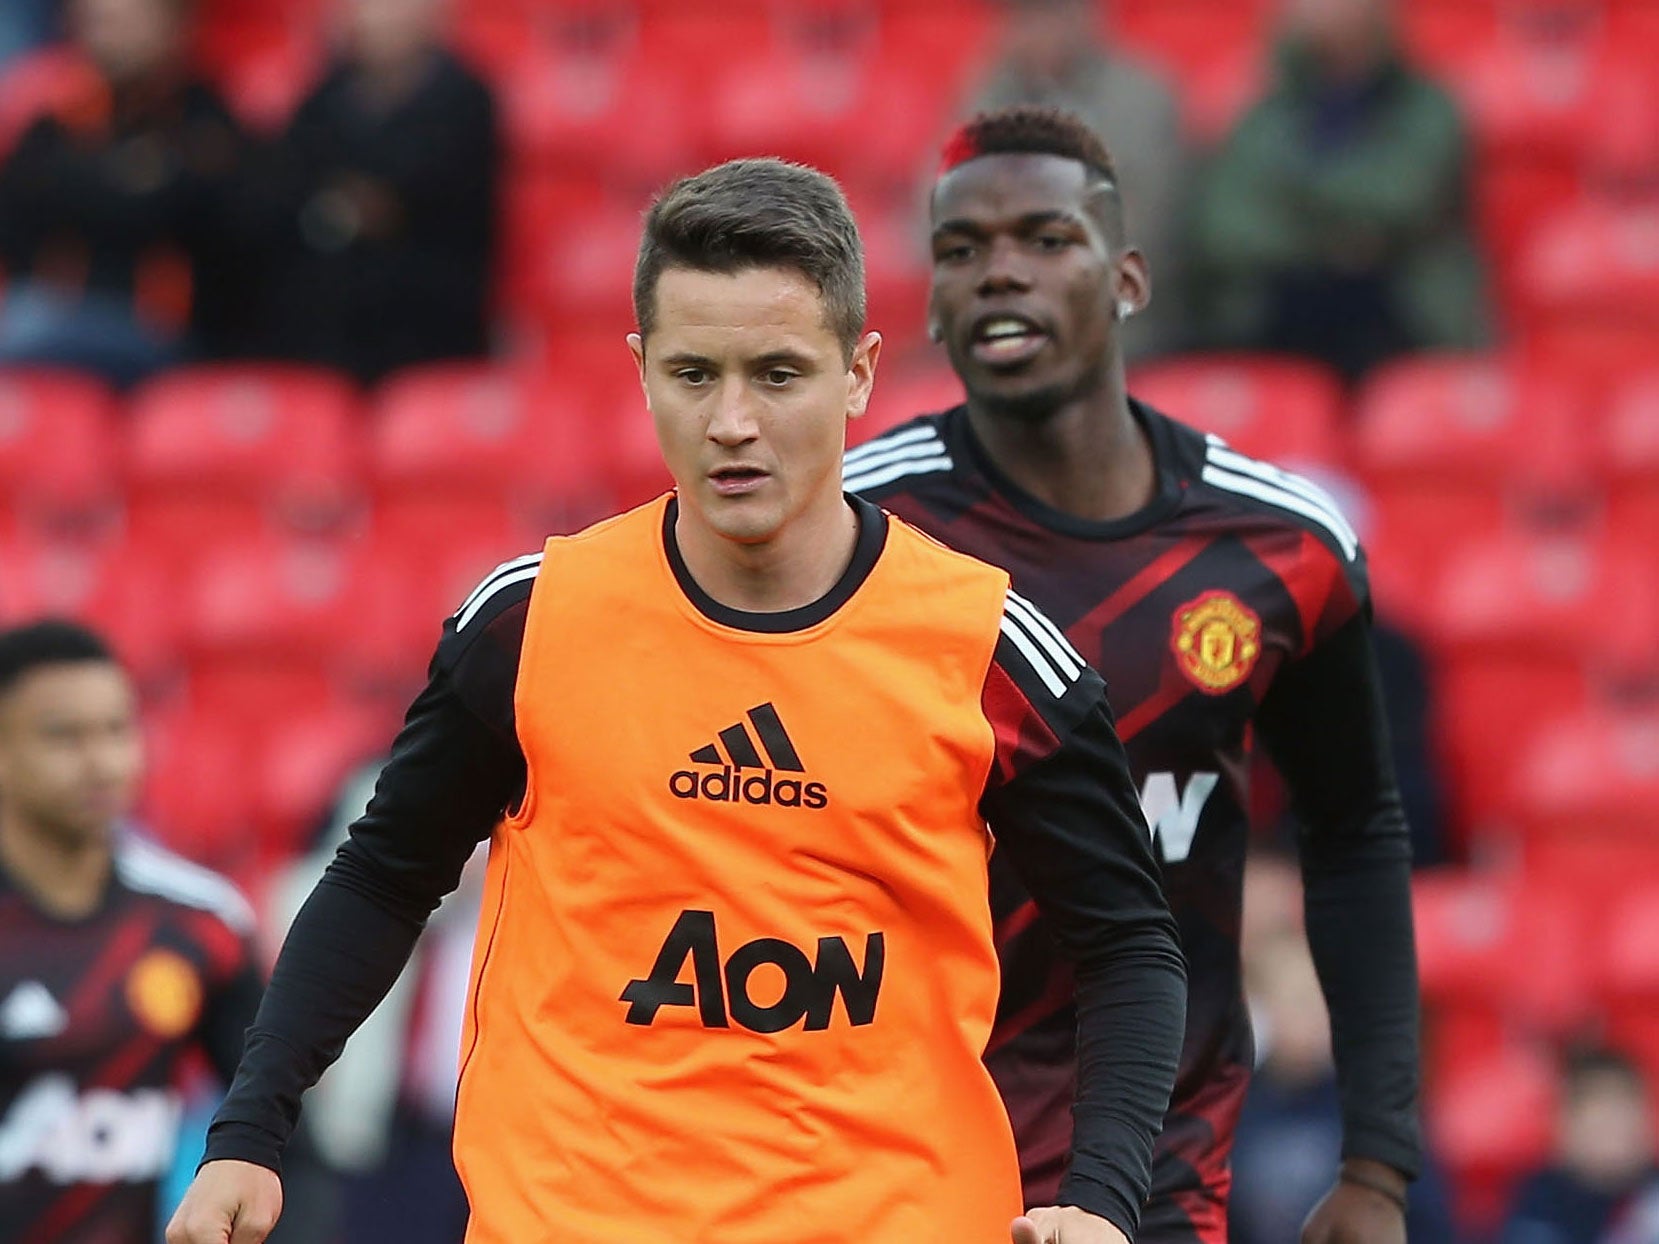 Ander Herrera has only made three appearances for Manchester United this season